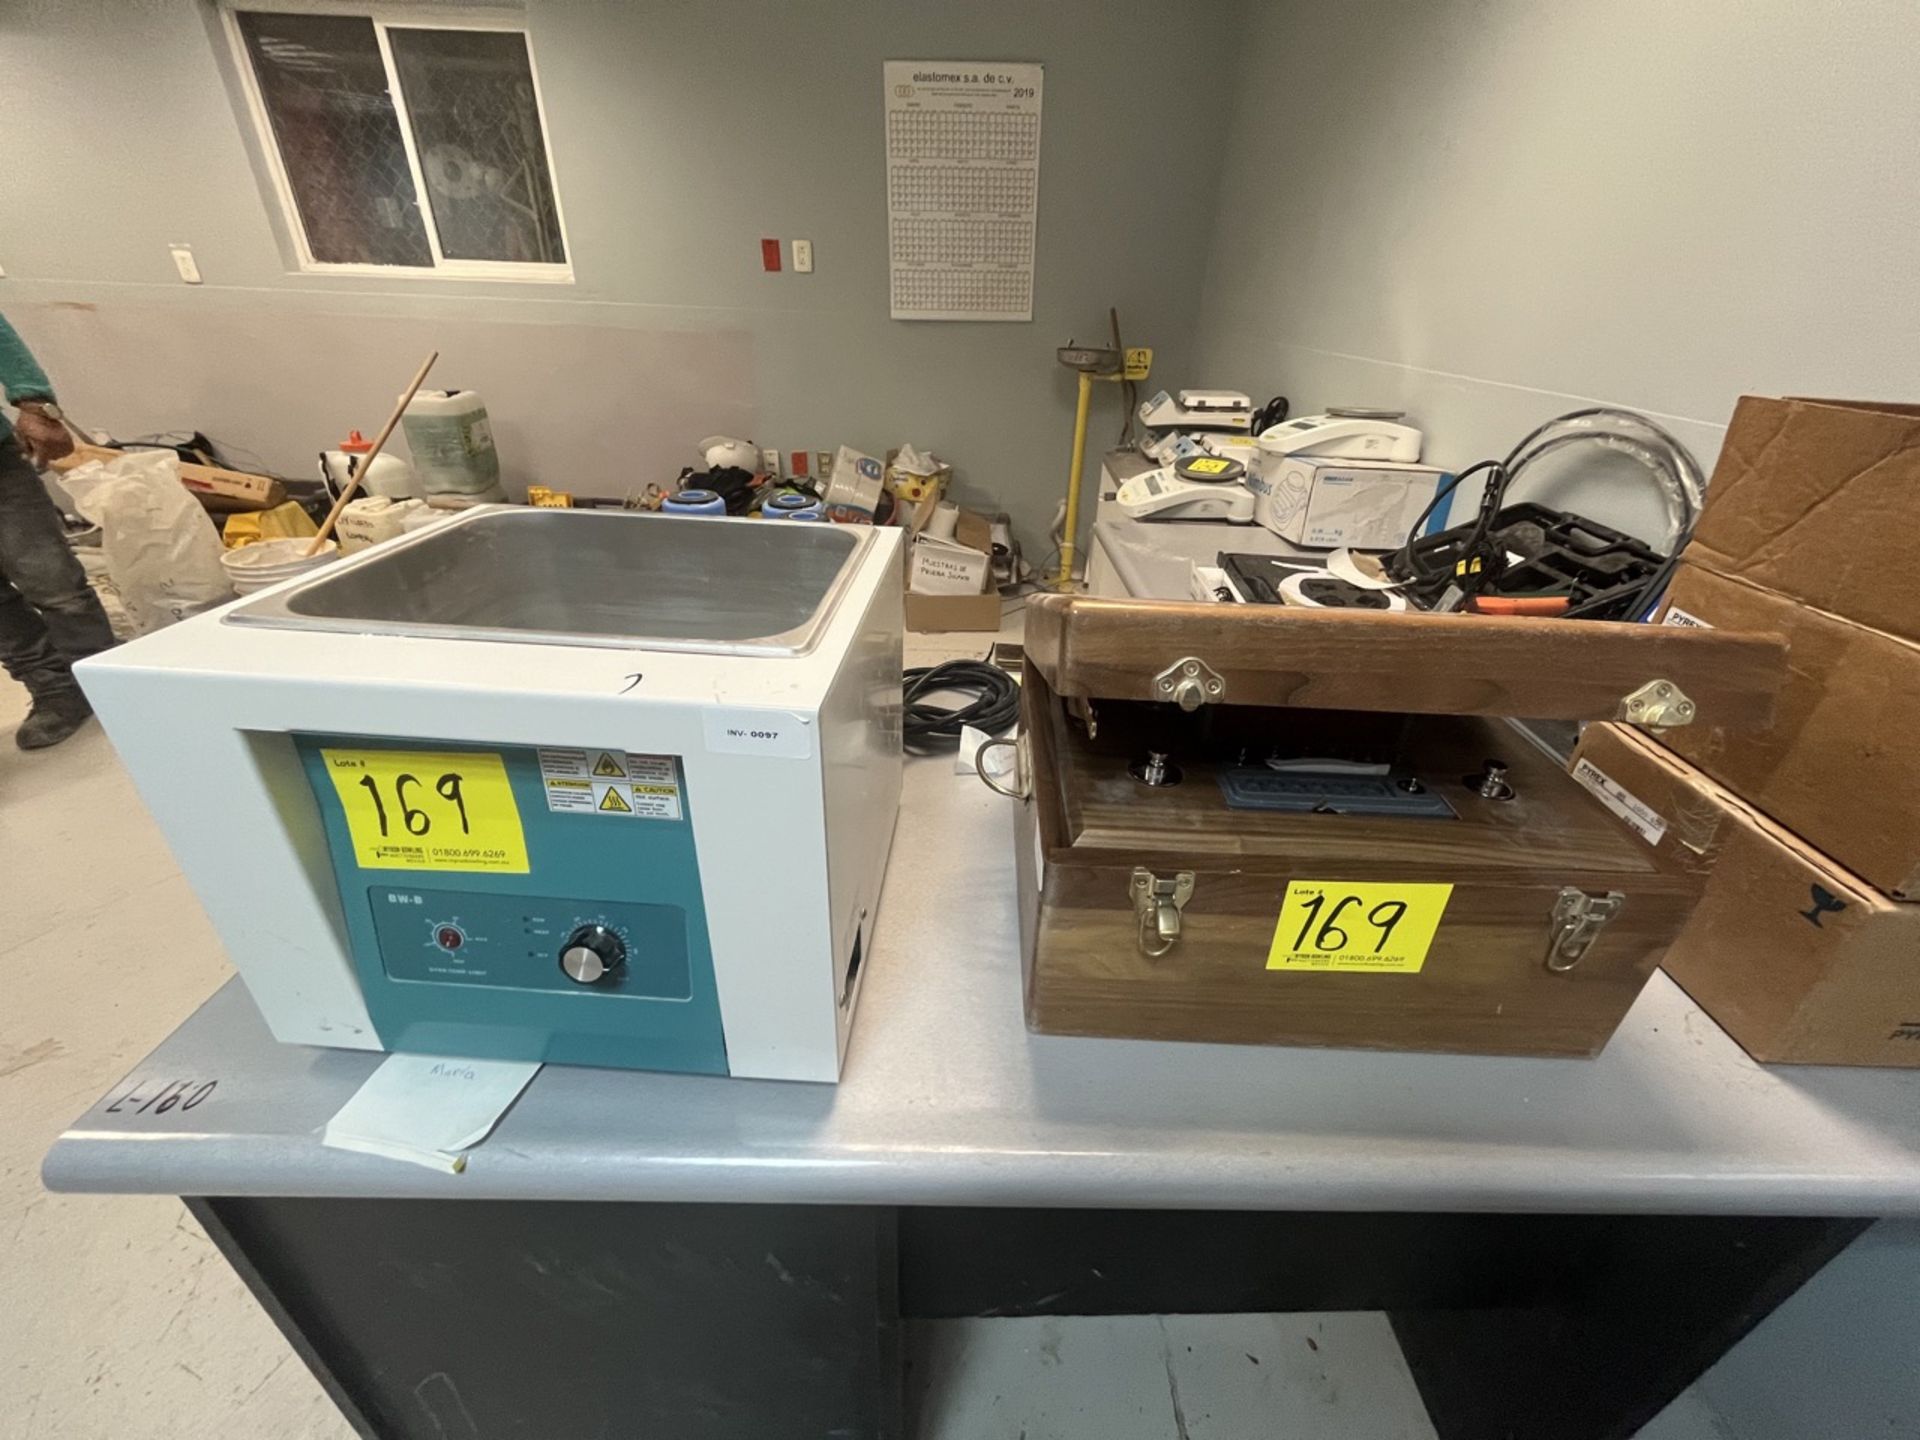 Lot of 2 pieces of laboratory equipment contains: Ricelake Weight measuring system from 1 g to 2 kg